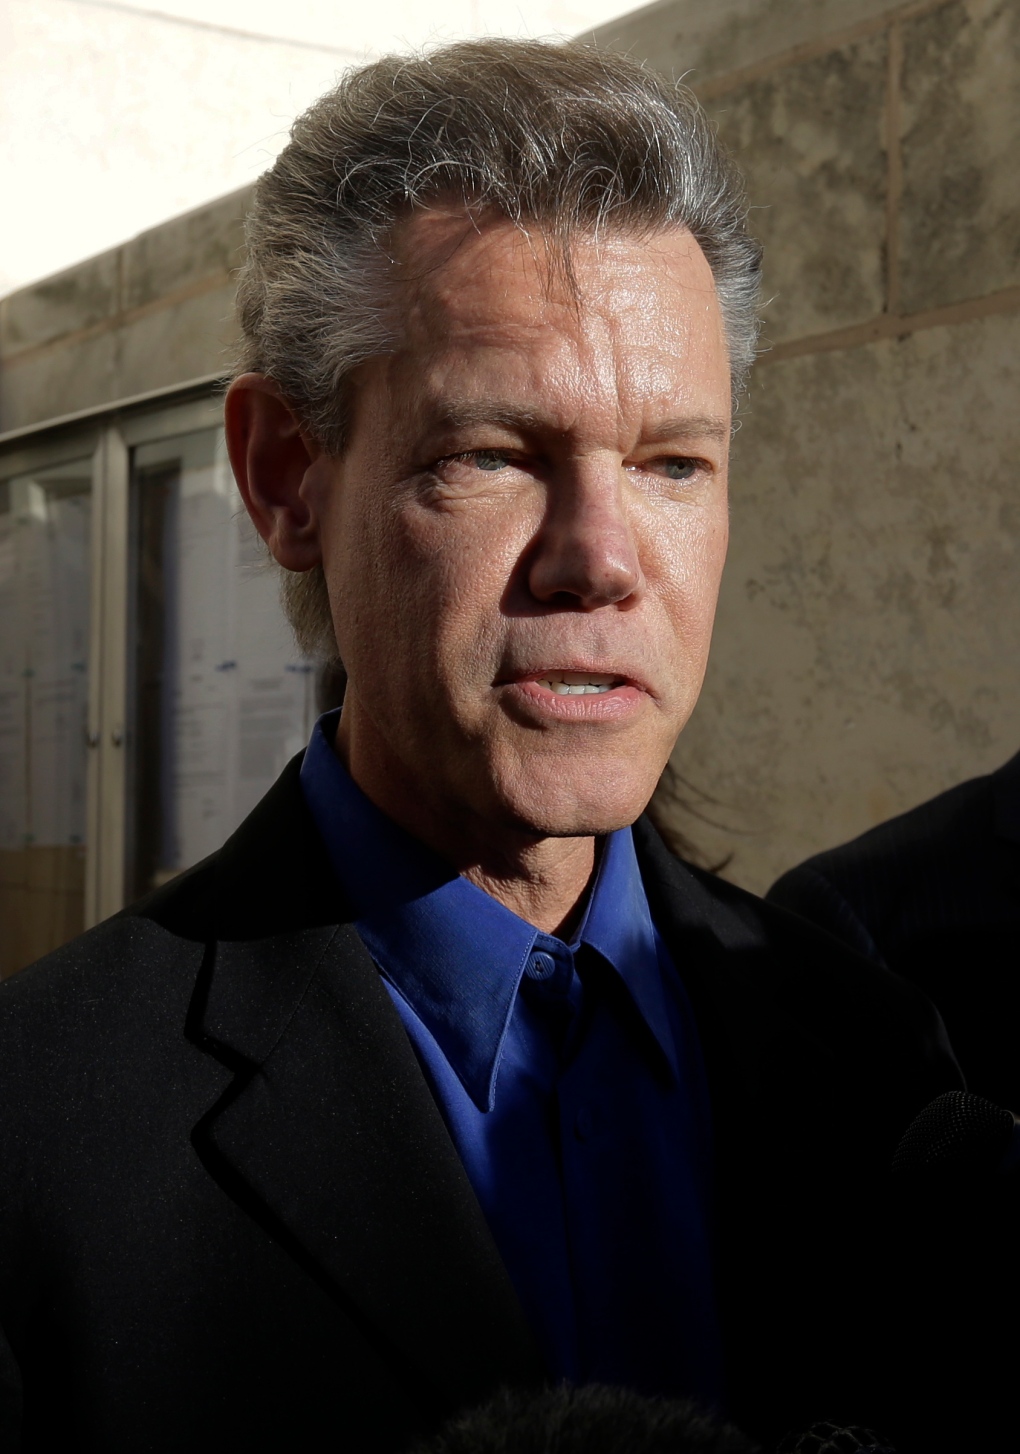 Randy Travis speaks at Grayson County Courthouse